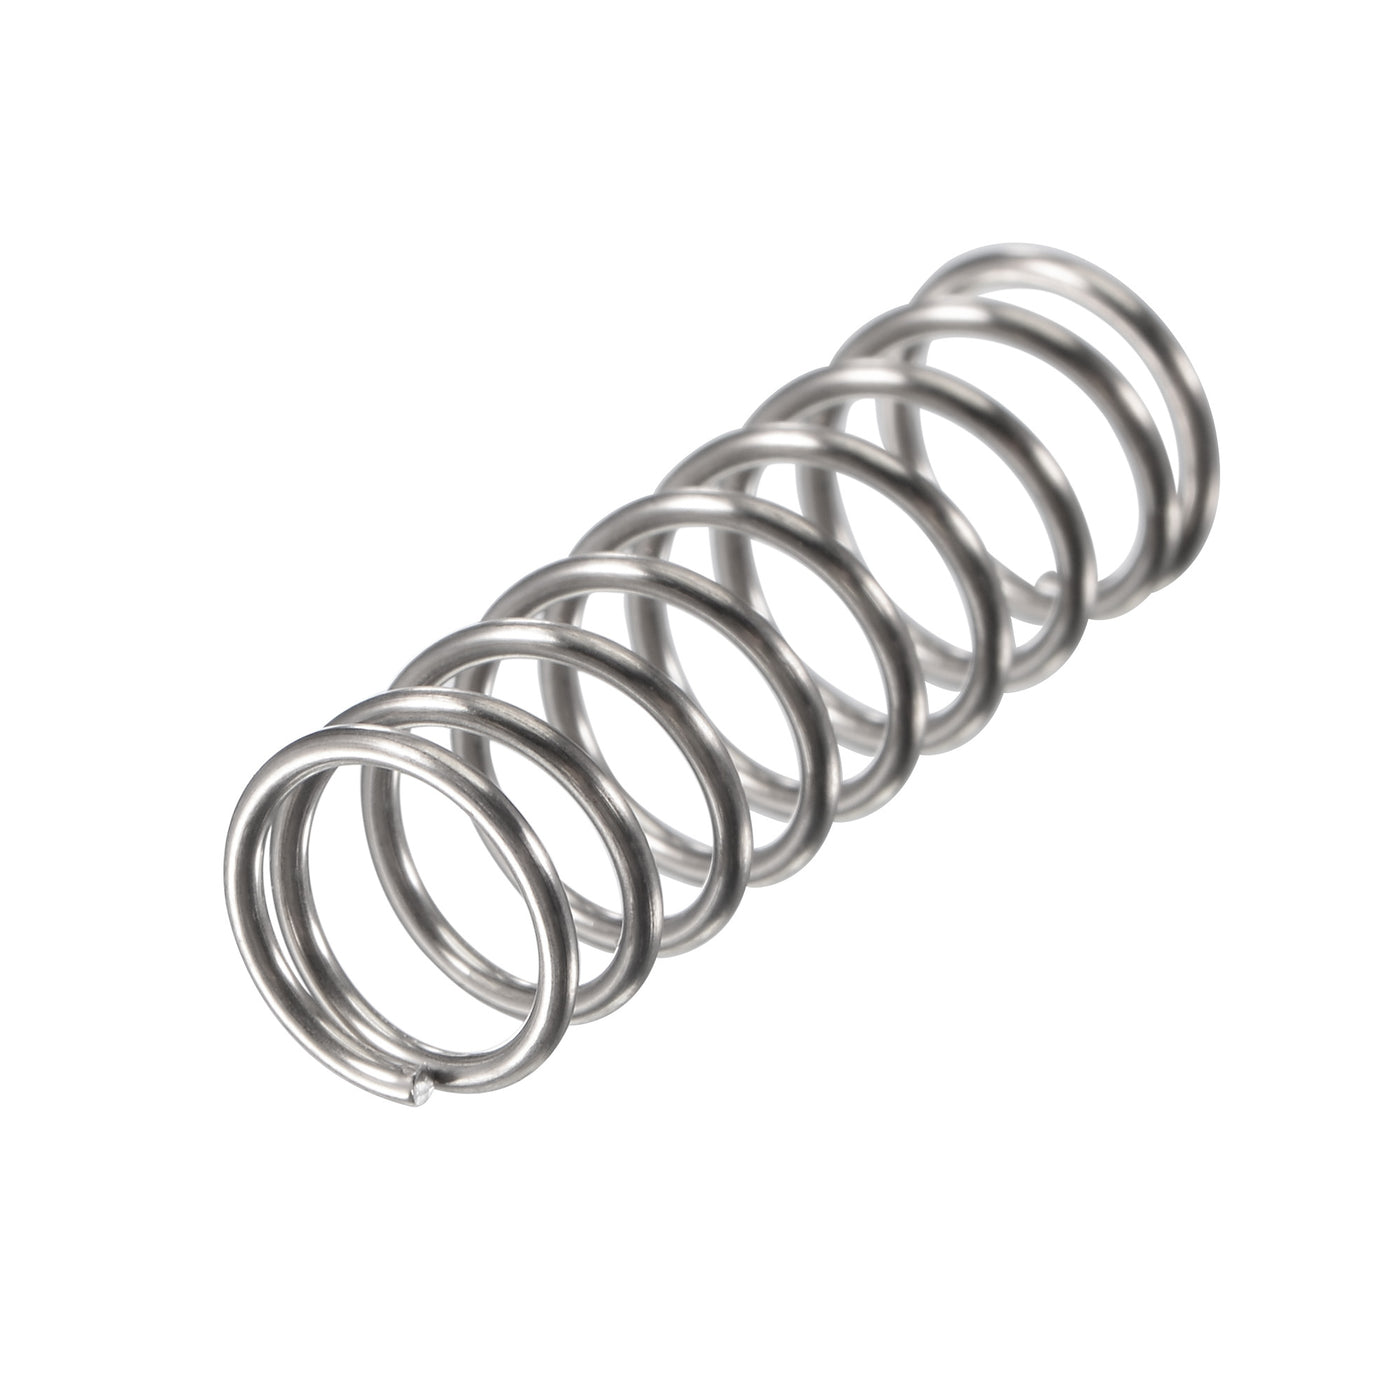 uxcell Uxcell 8mmx0.8mmx25mm 304 Stainless Steel Compression Spring 11.8N Load Capacity 30pcs